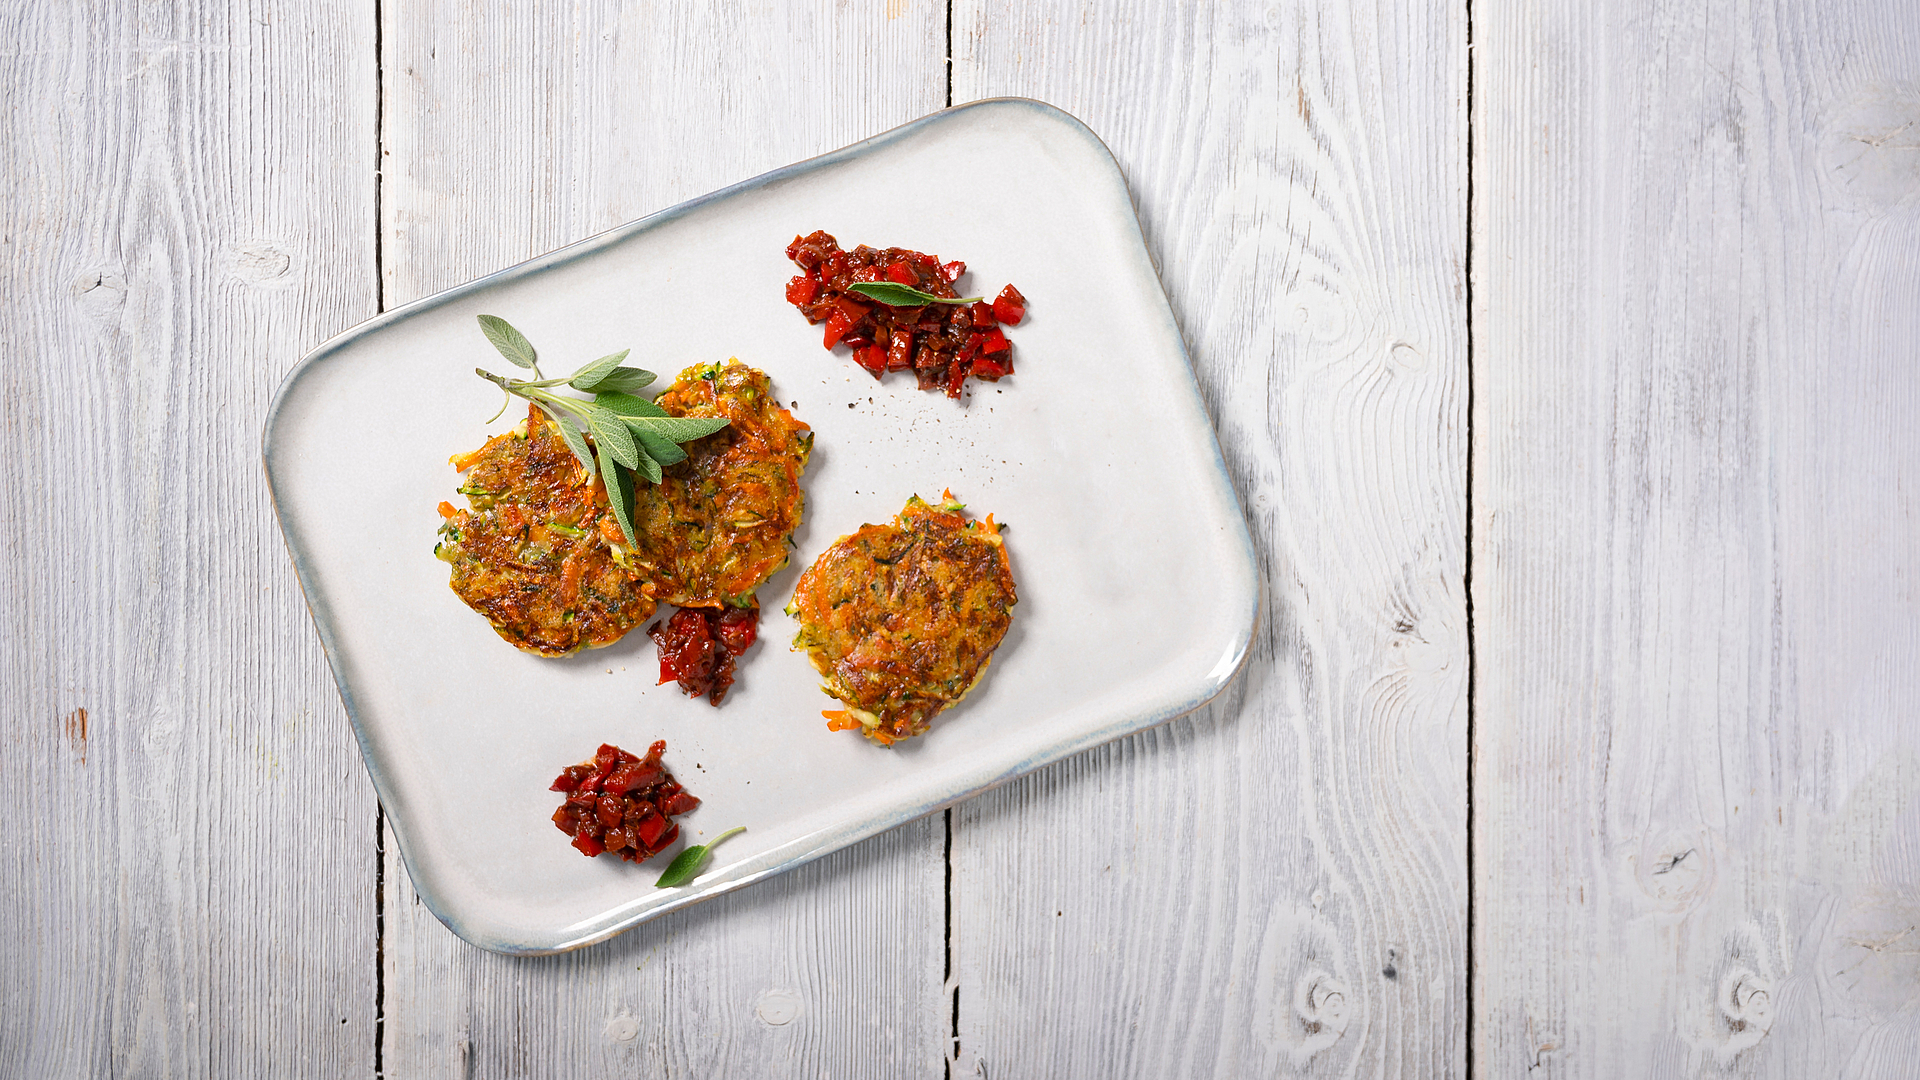 Courgette fritters with red pepper sugo